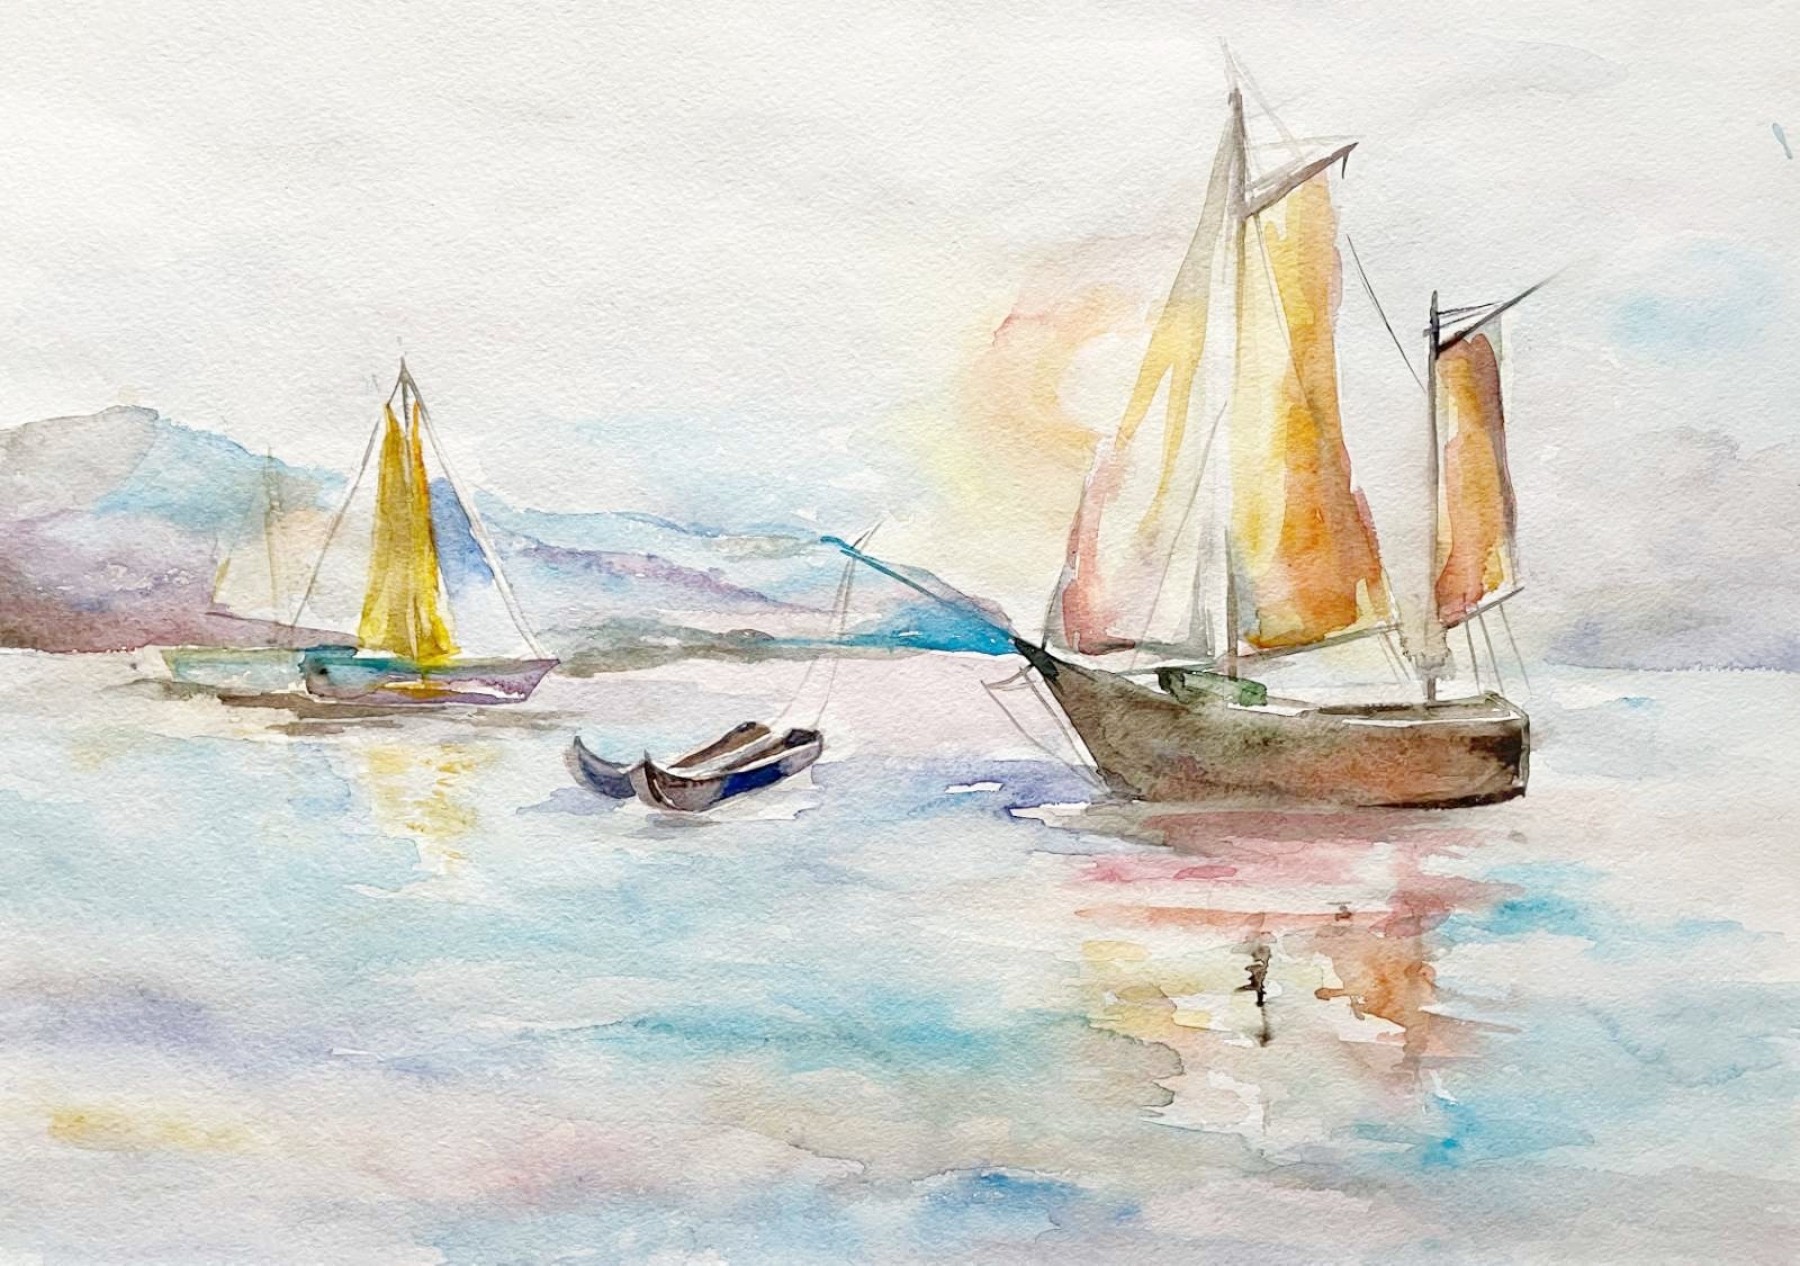 Picture Sails in the harbor ᐉ Apter Alexandra ᐉ online-gallery Molbert.